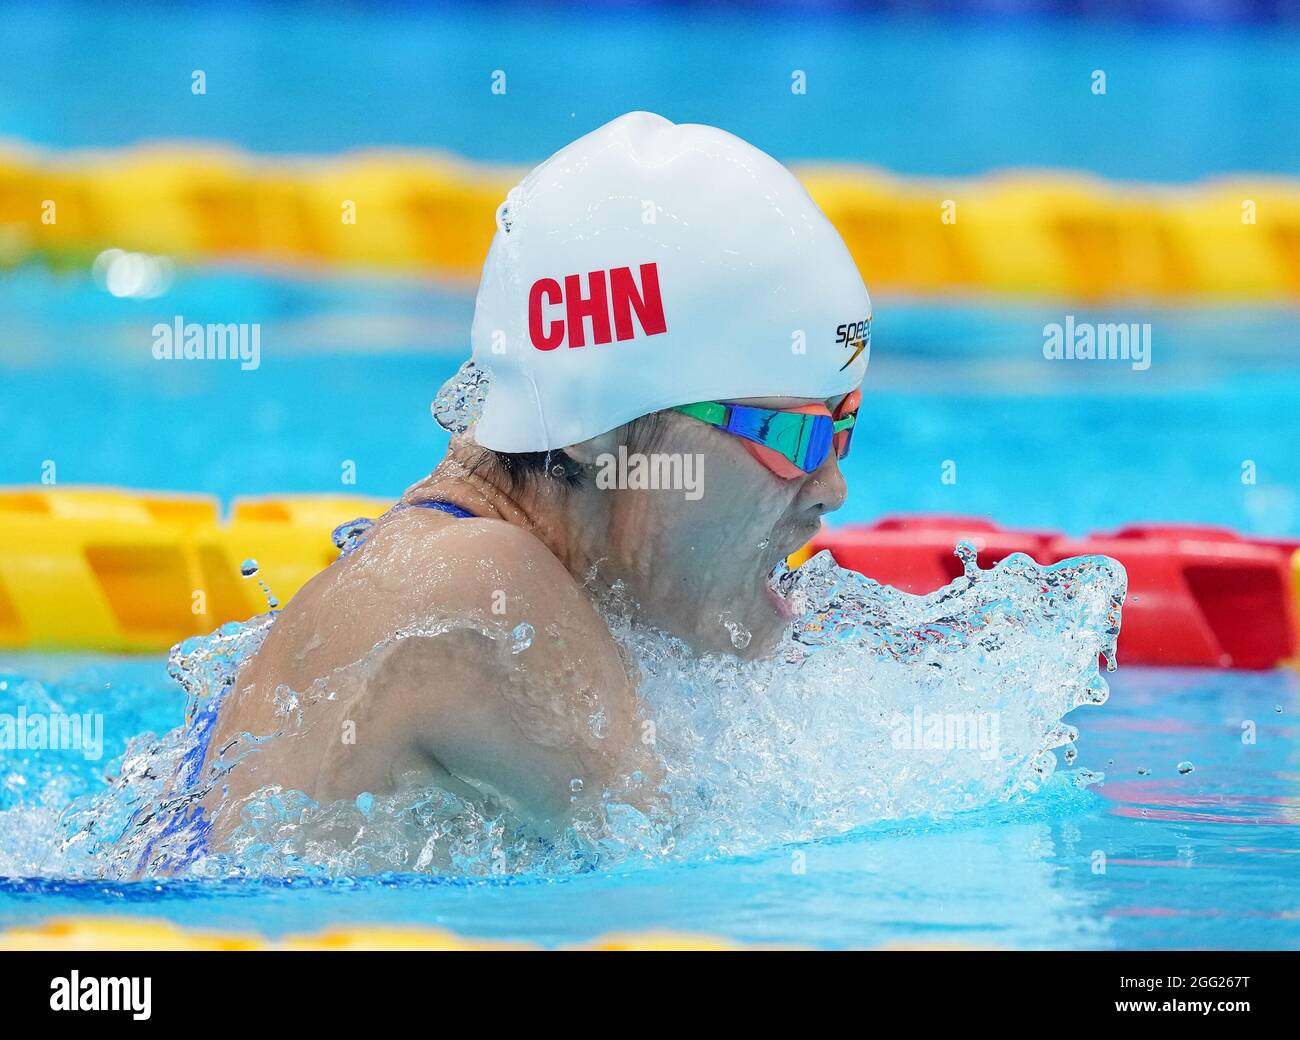 Tokyo, Japan. 28th Aug, 2021. Liu Daomin of China competes during the women's 100m breaststroke SB6 final of swimming event at the Tokyo 2020 Paralympic Games in Tokyo, Japan, Aug. 28, 2021. Credit: Cai Yang/Xinhua/Alamy Live News Stock Photo